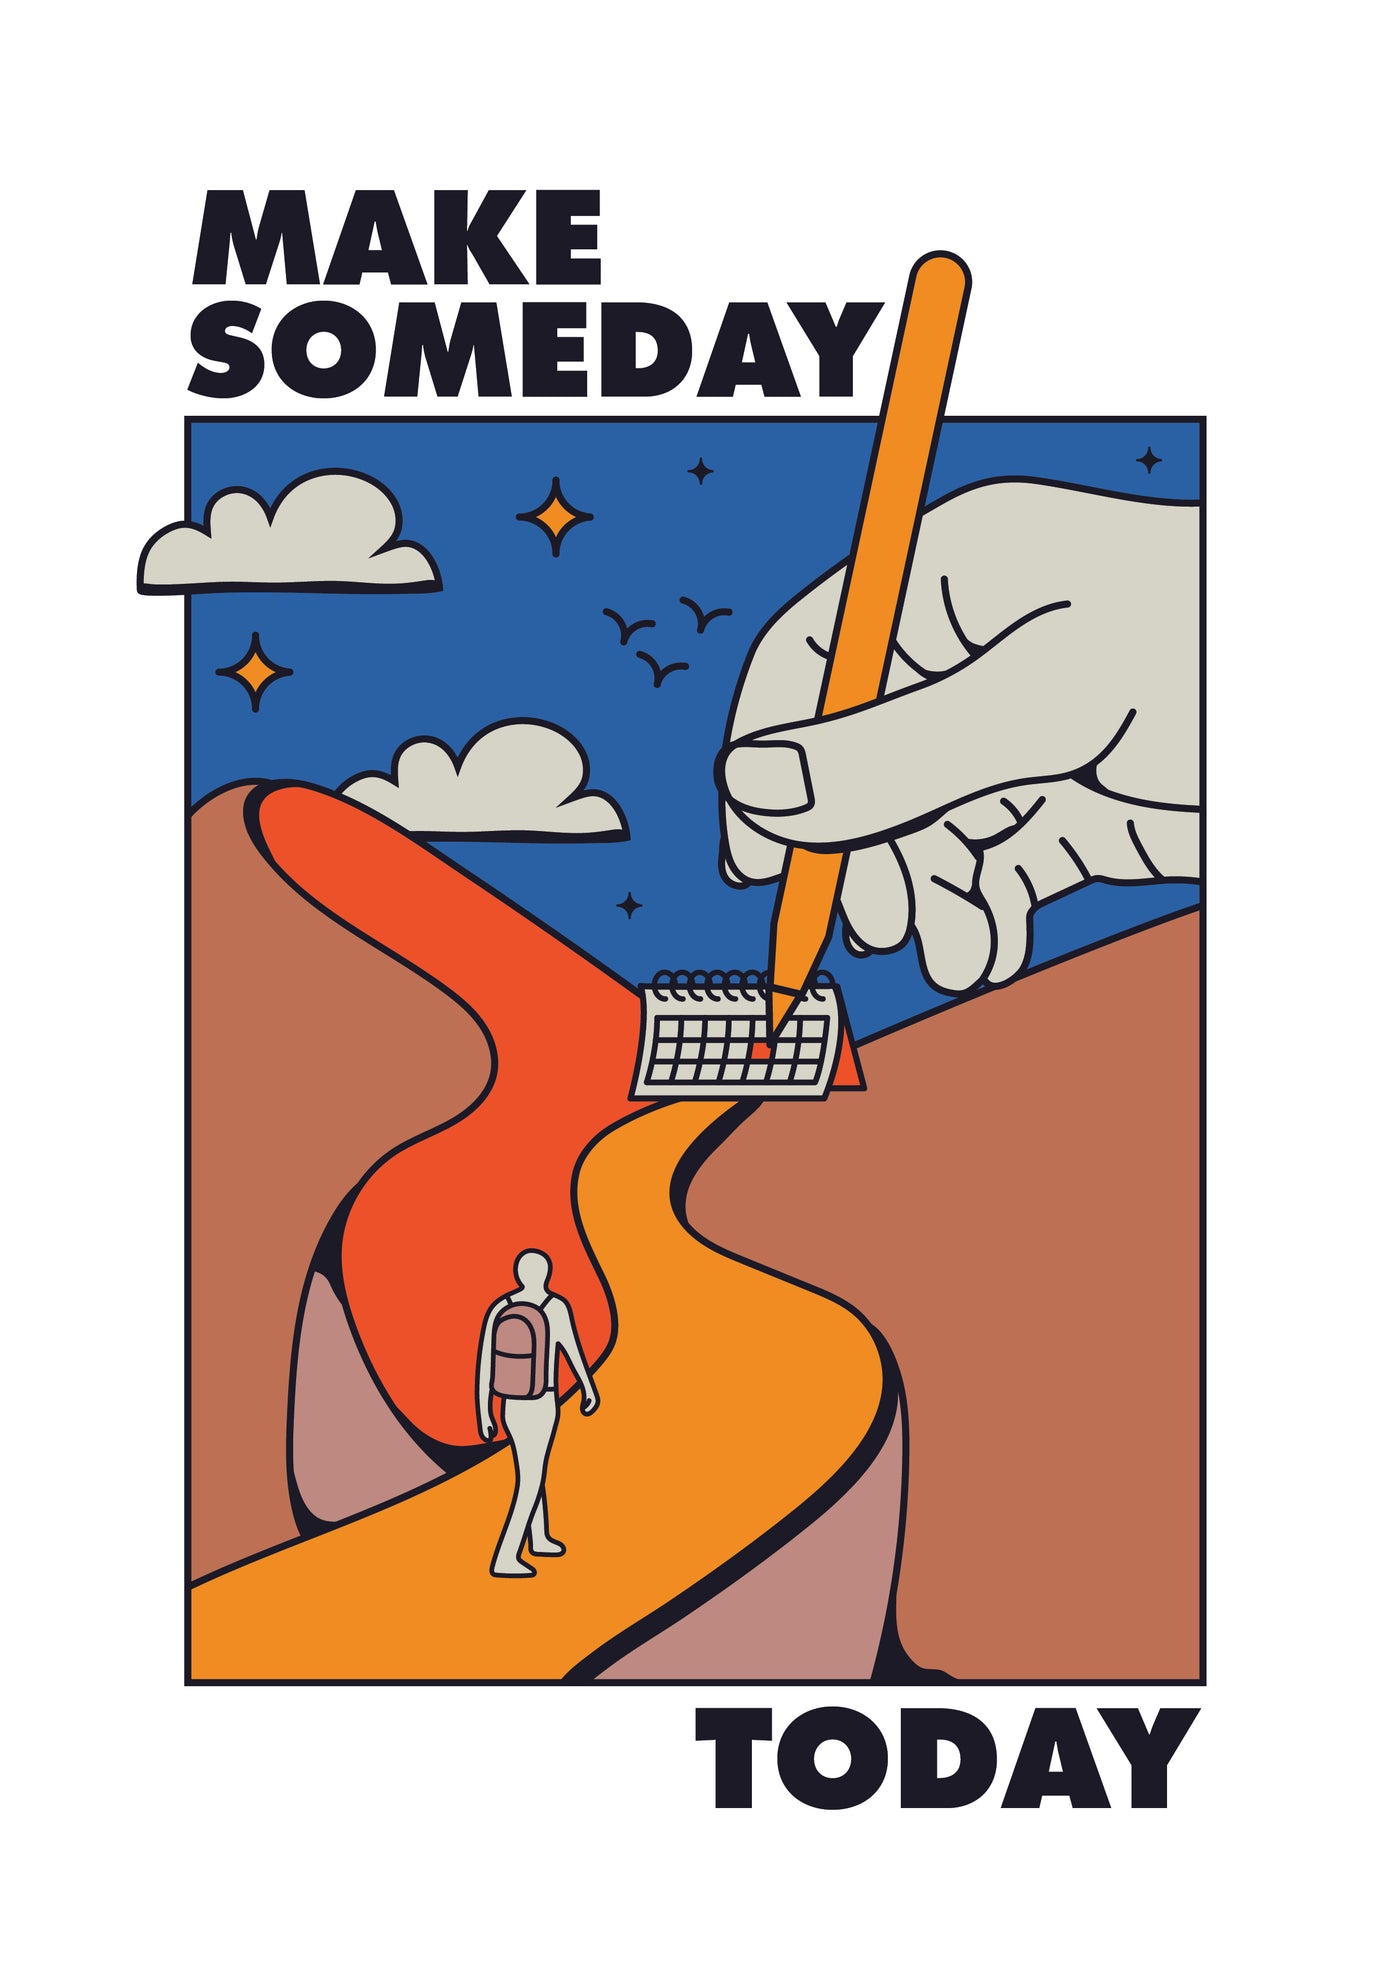 Exercise: Make Someday Today